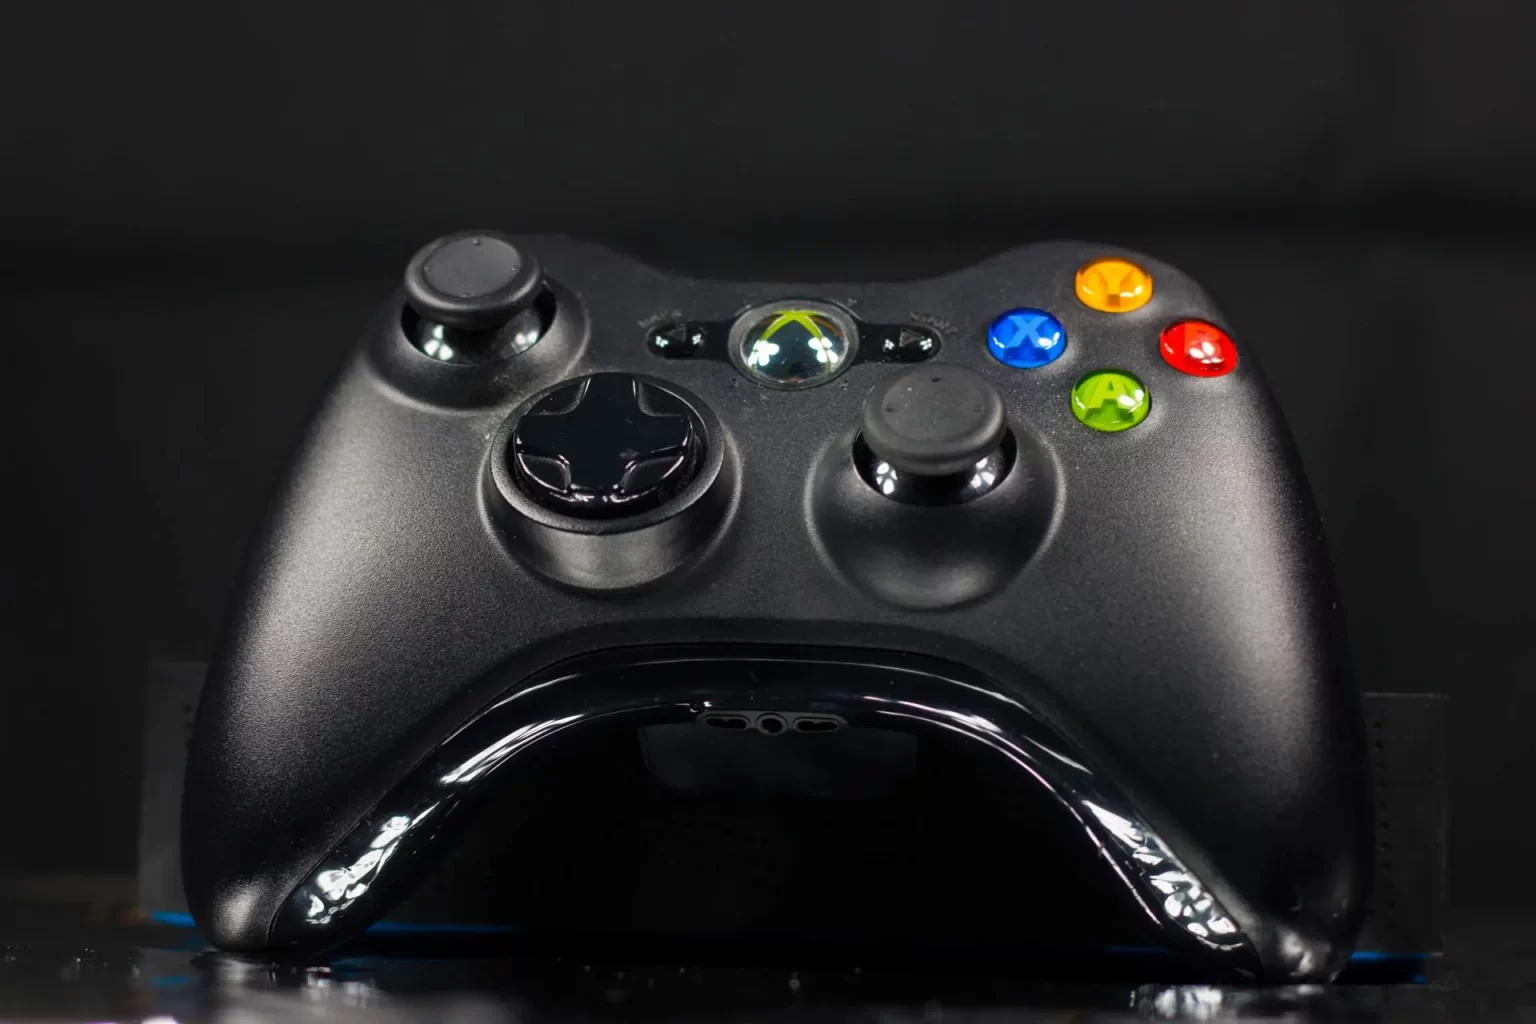 A close-up of a black gaming controller with colored buttons, two joysticks, and a directional pad, placed on a reflective surface against a dark background.